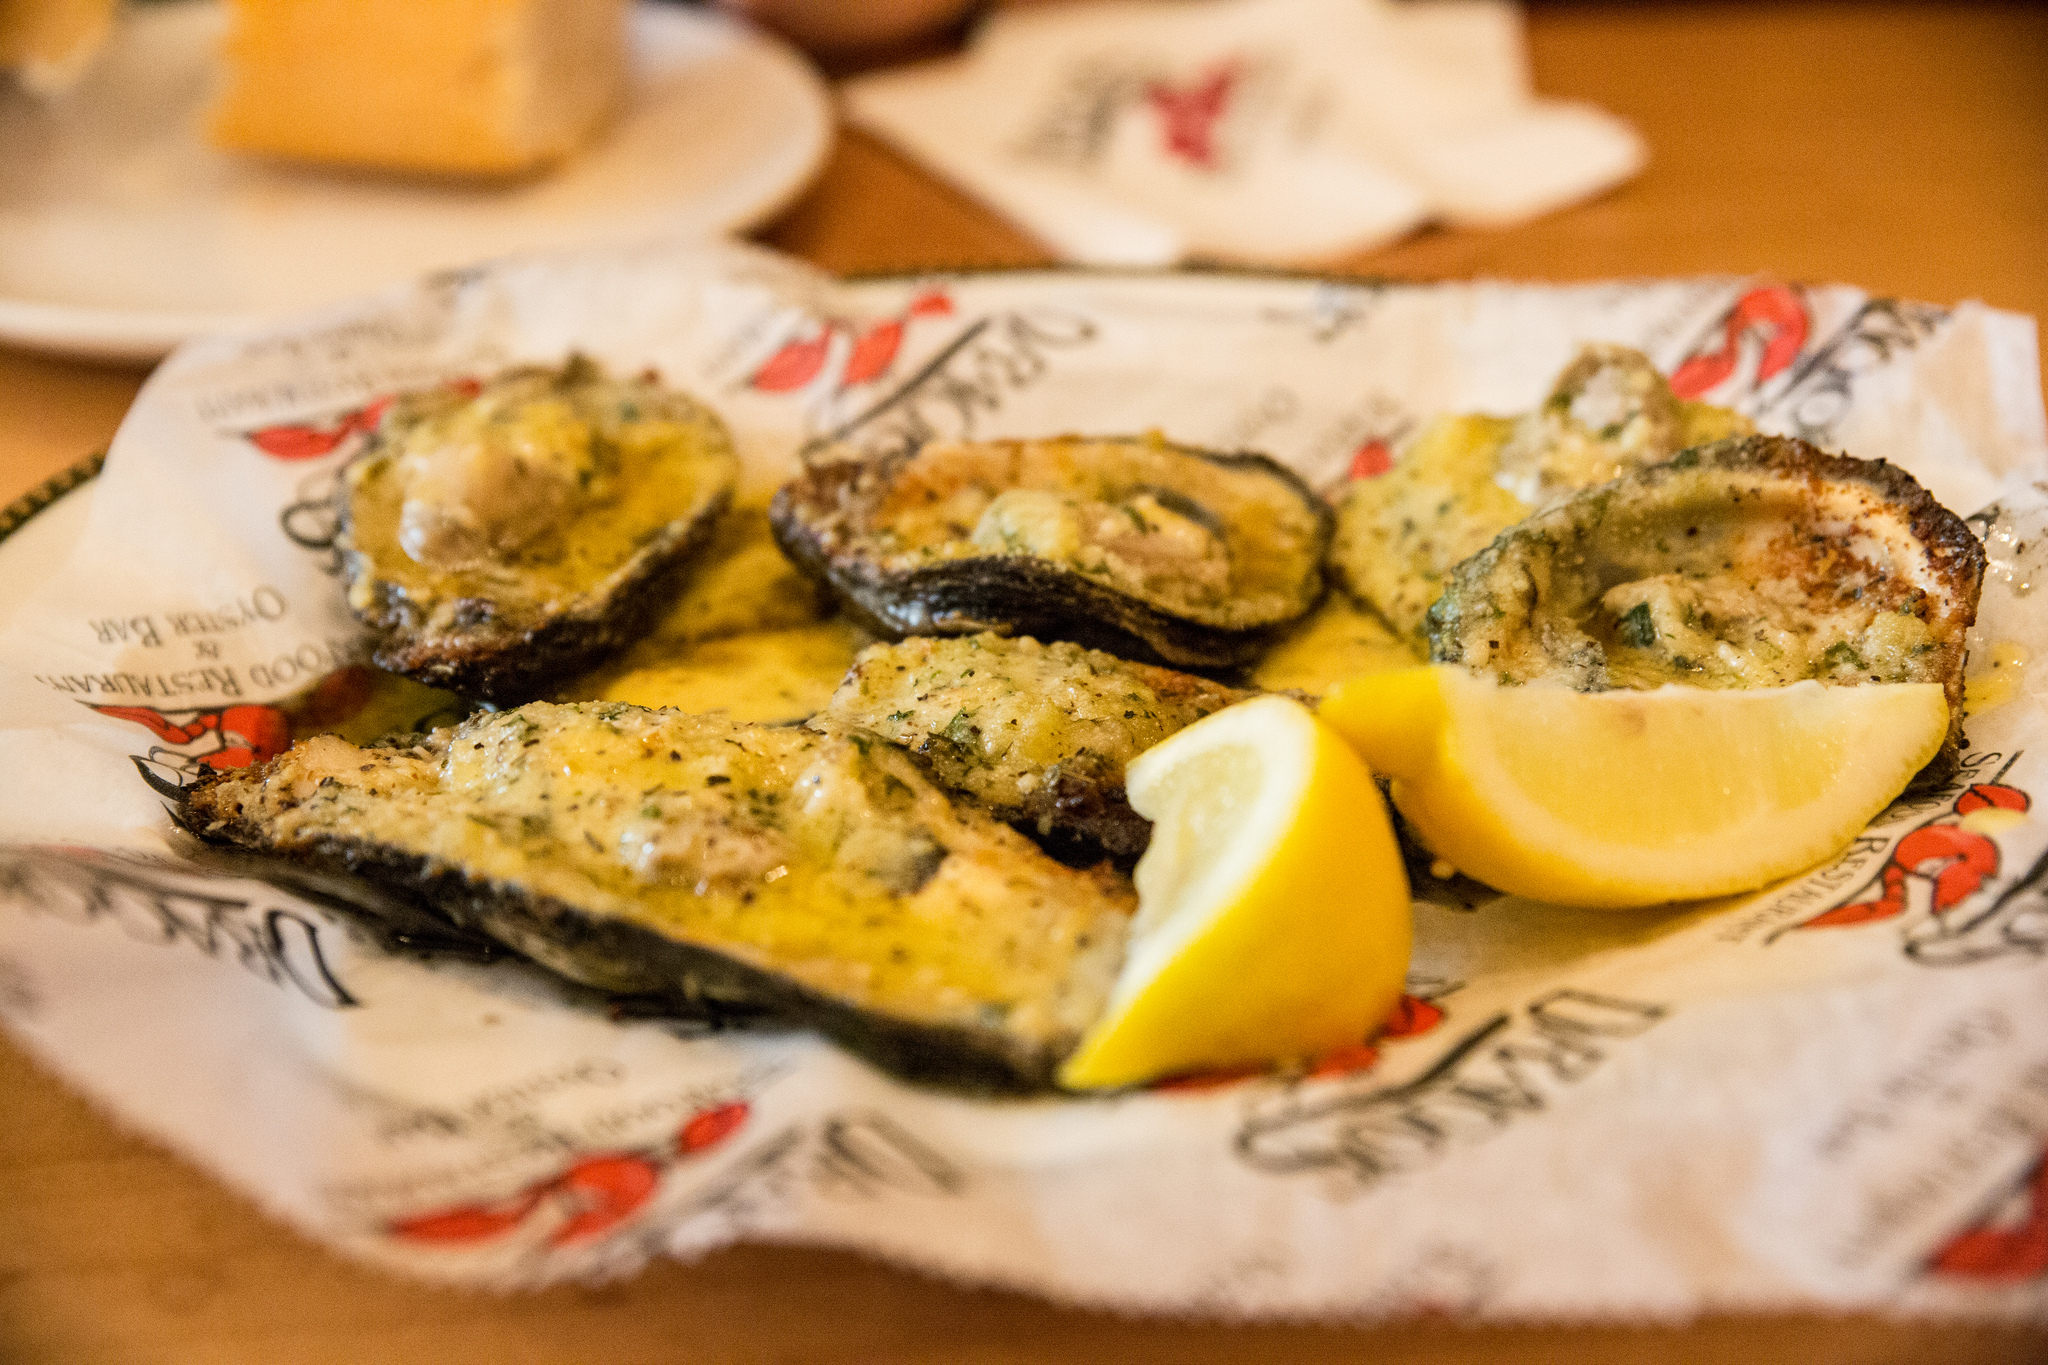 Drago's charbroiled oysters